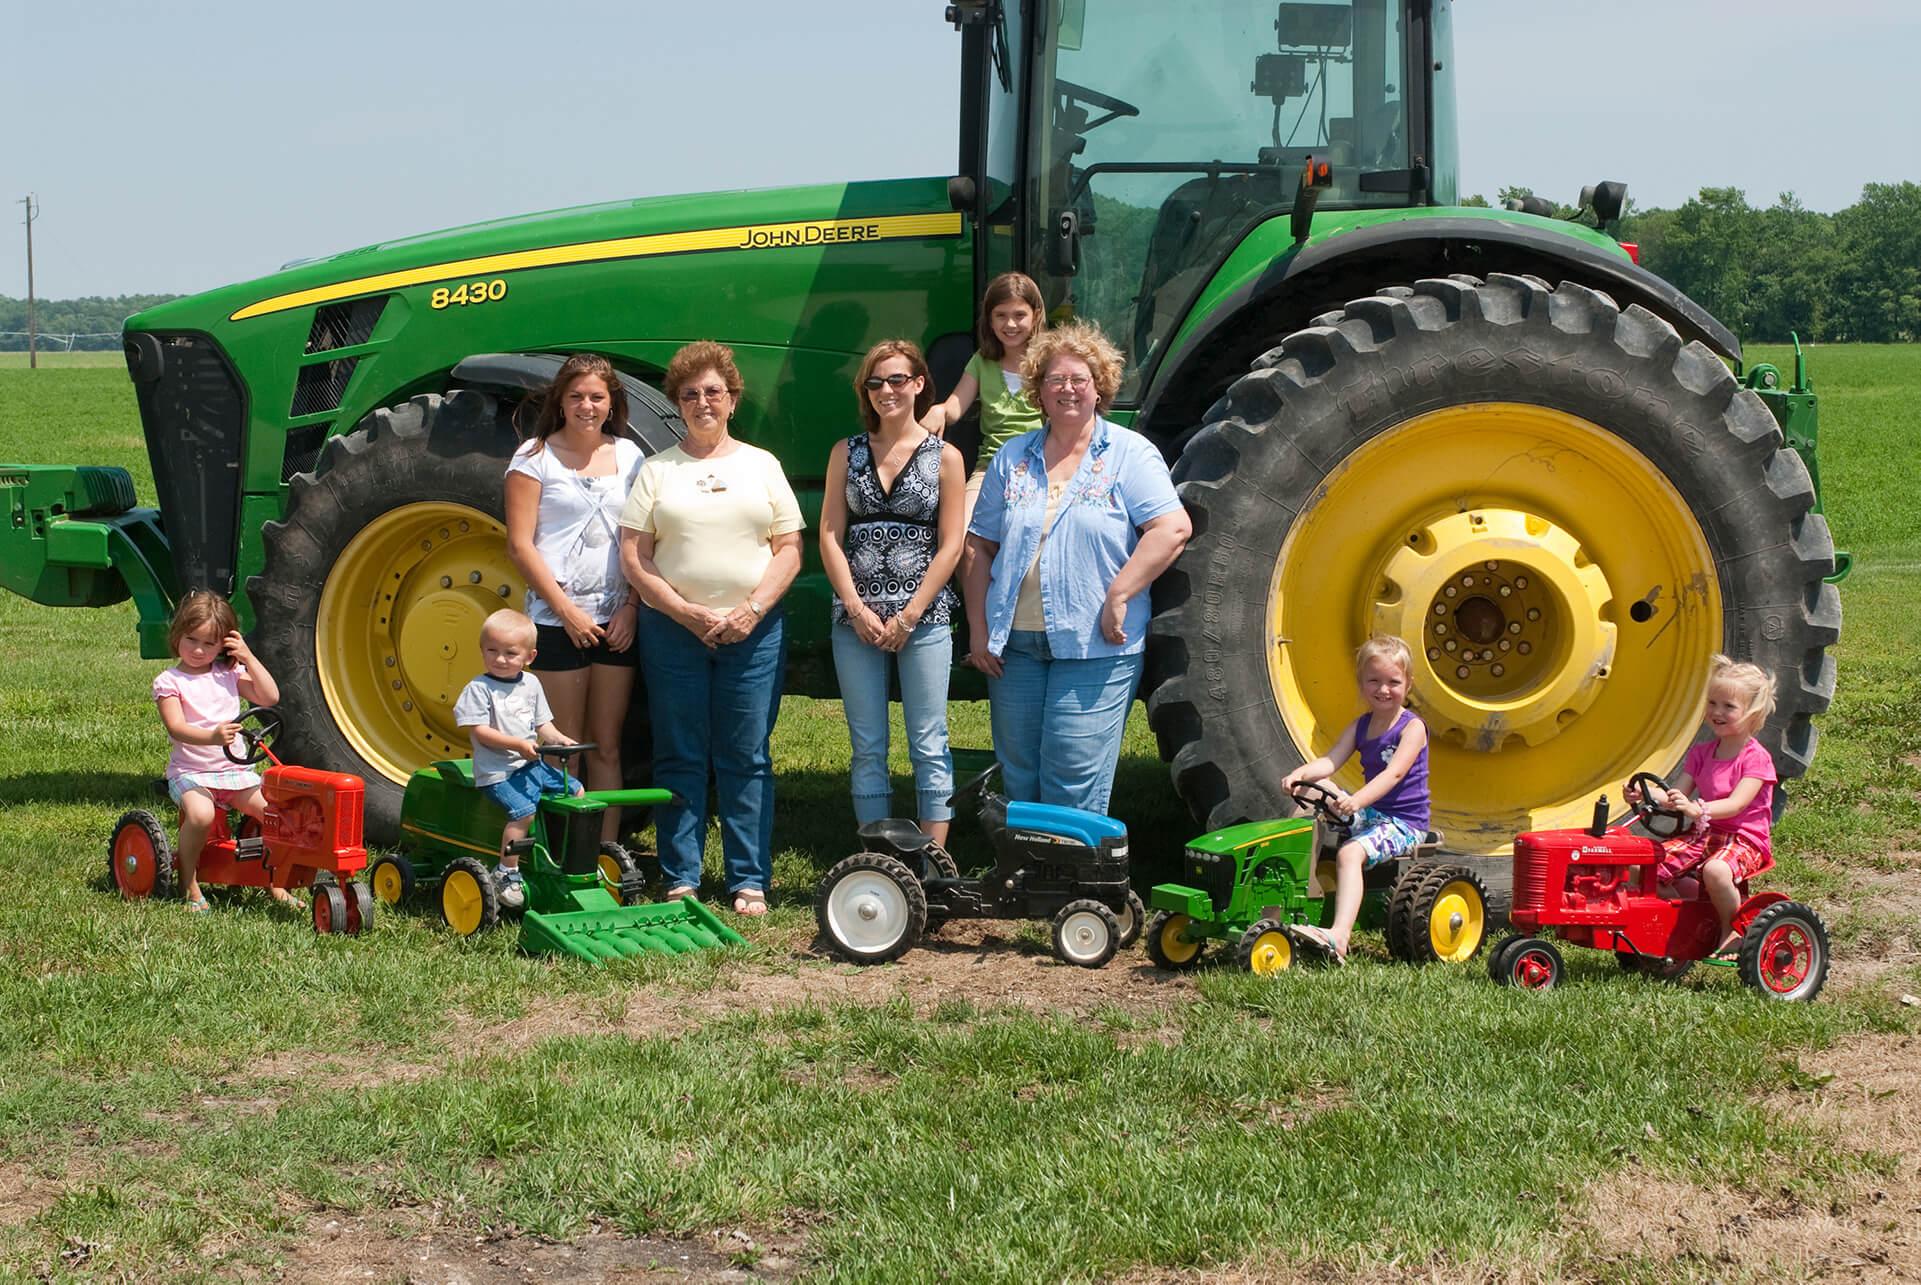 Family of women farmers standing in front of tractor with their children sitting on small toy versions of farm tractors